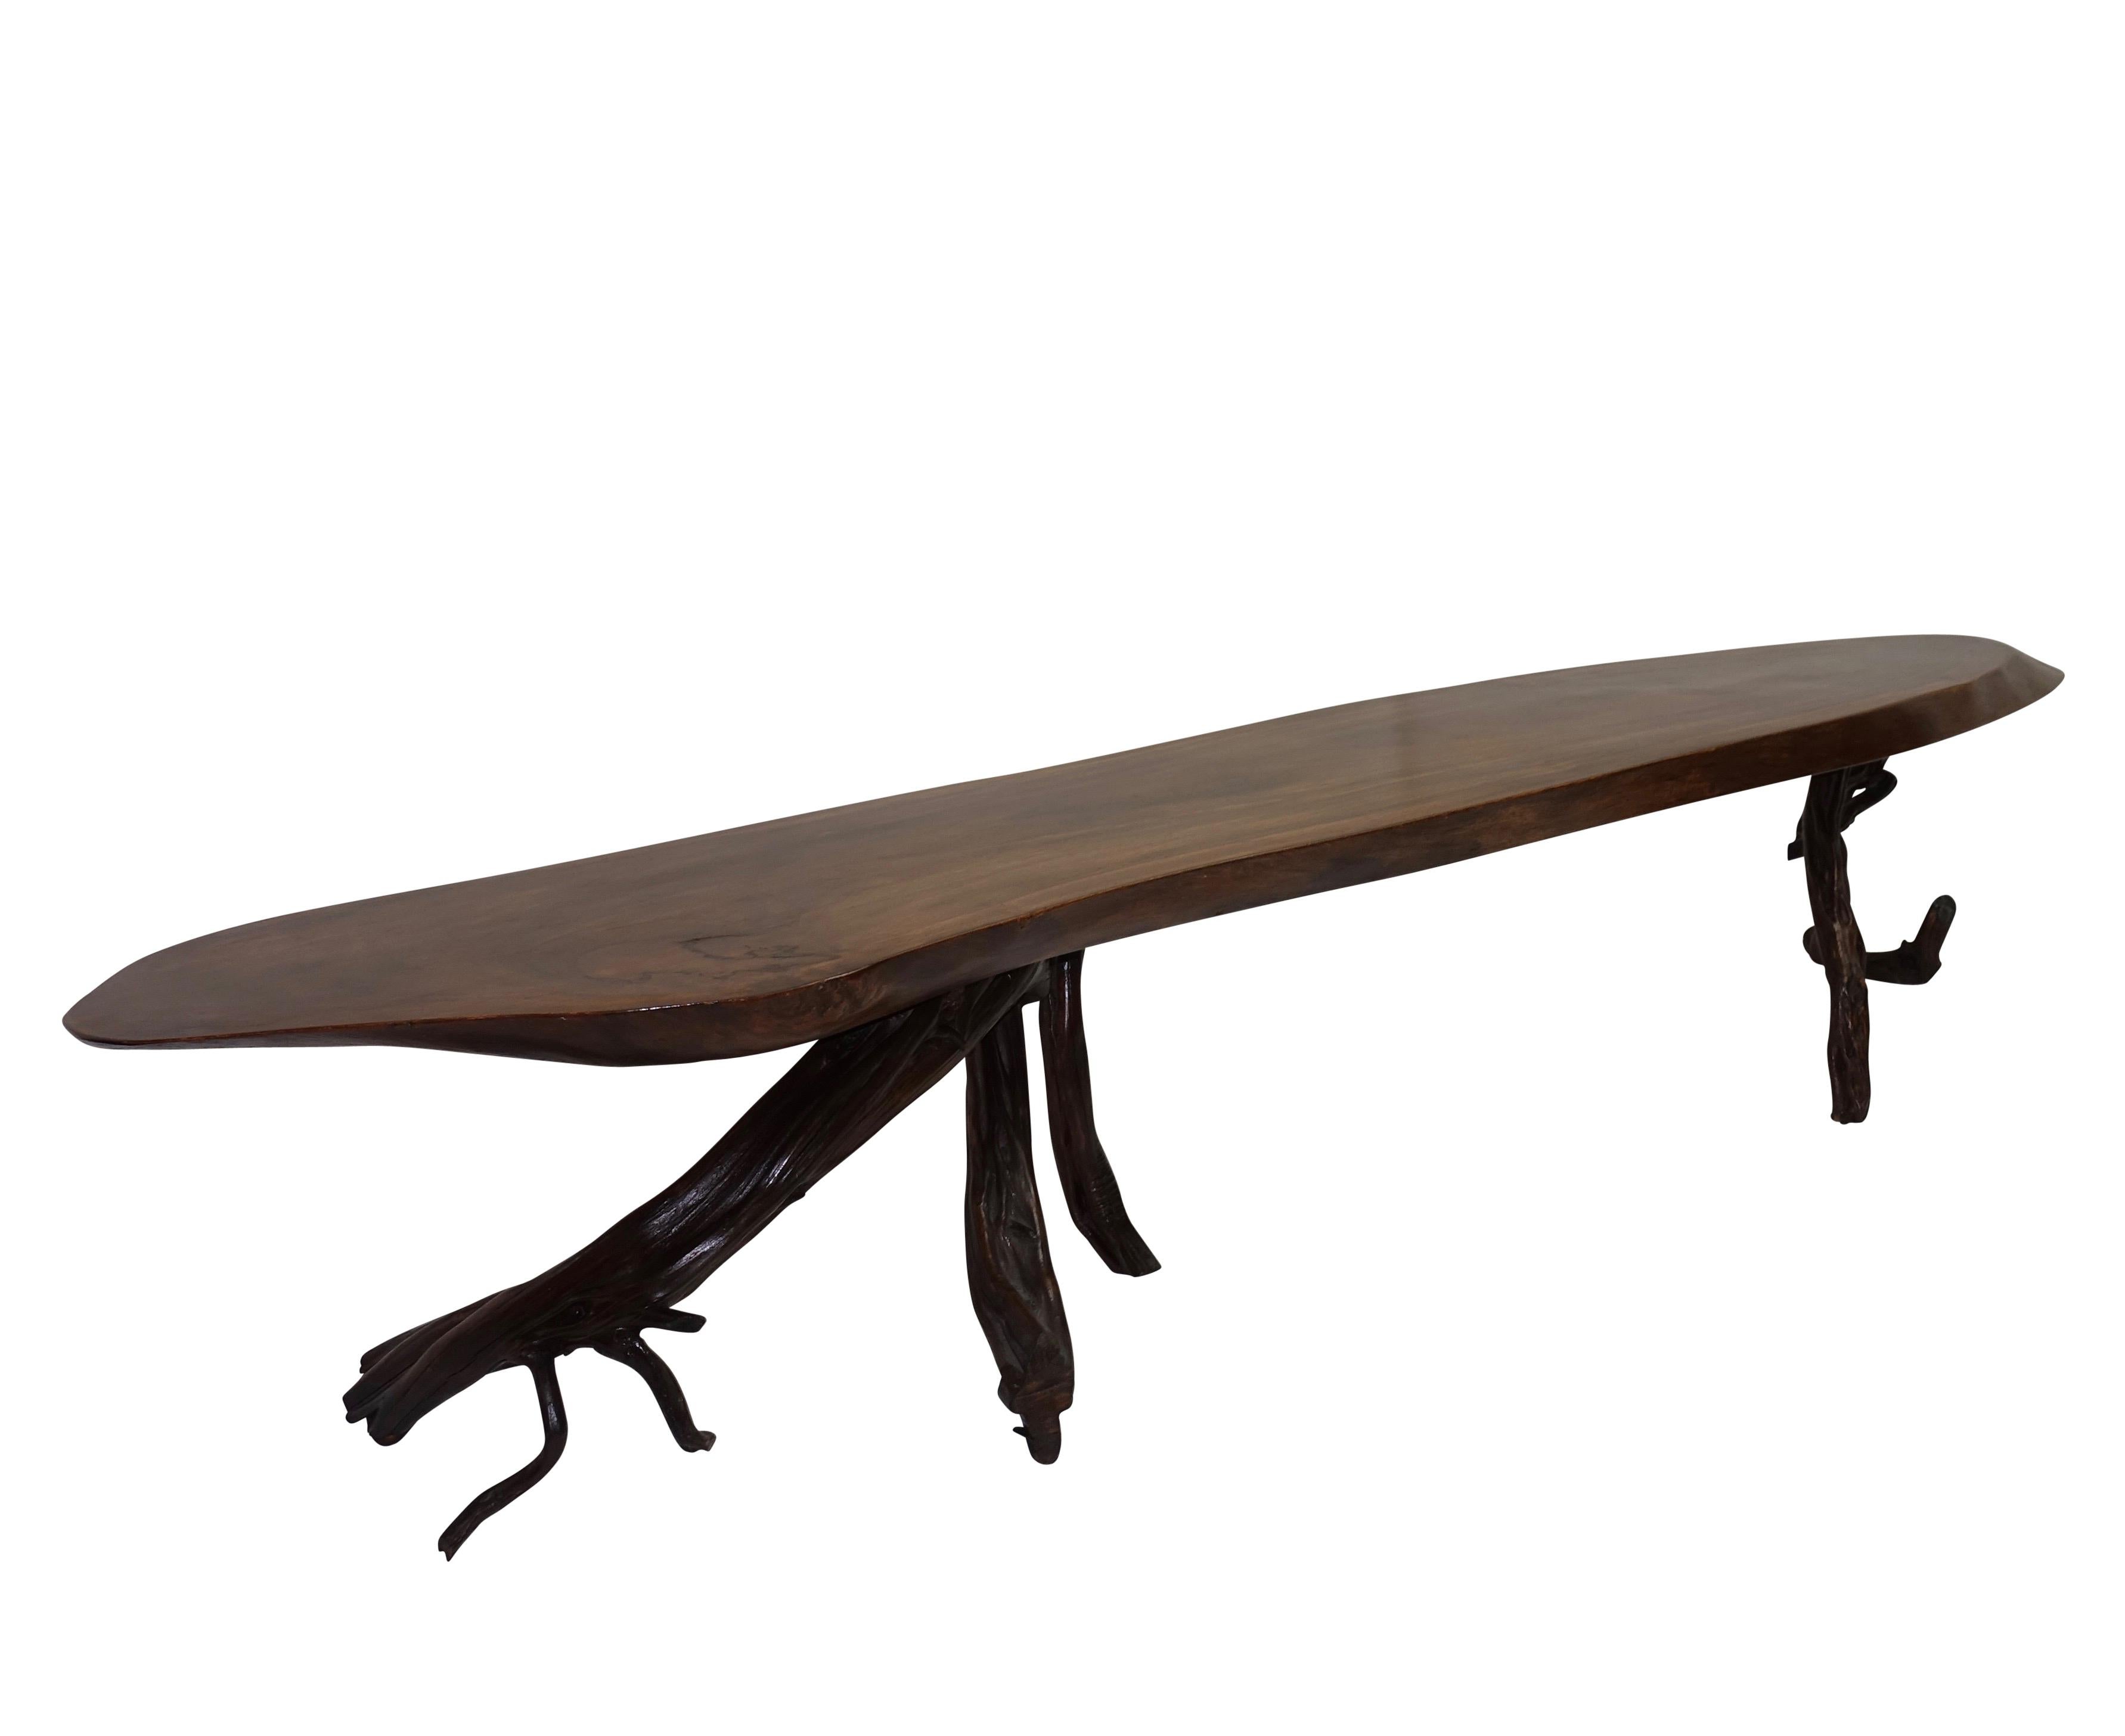 Large Walnut Slab Coffee Table, American, Mid-20th Century In Excellent Condition For Sale In San Francisco, CA